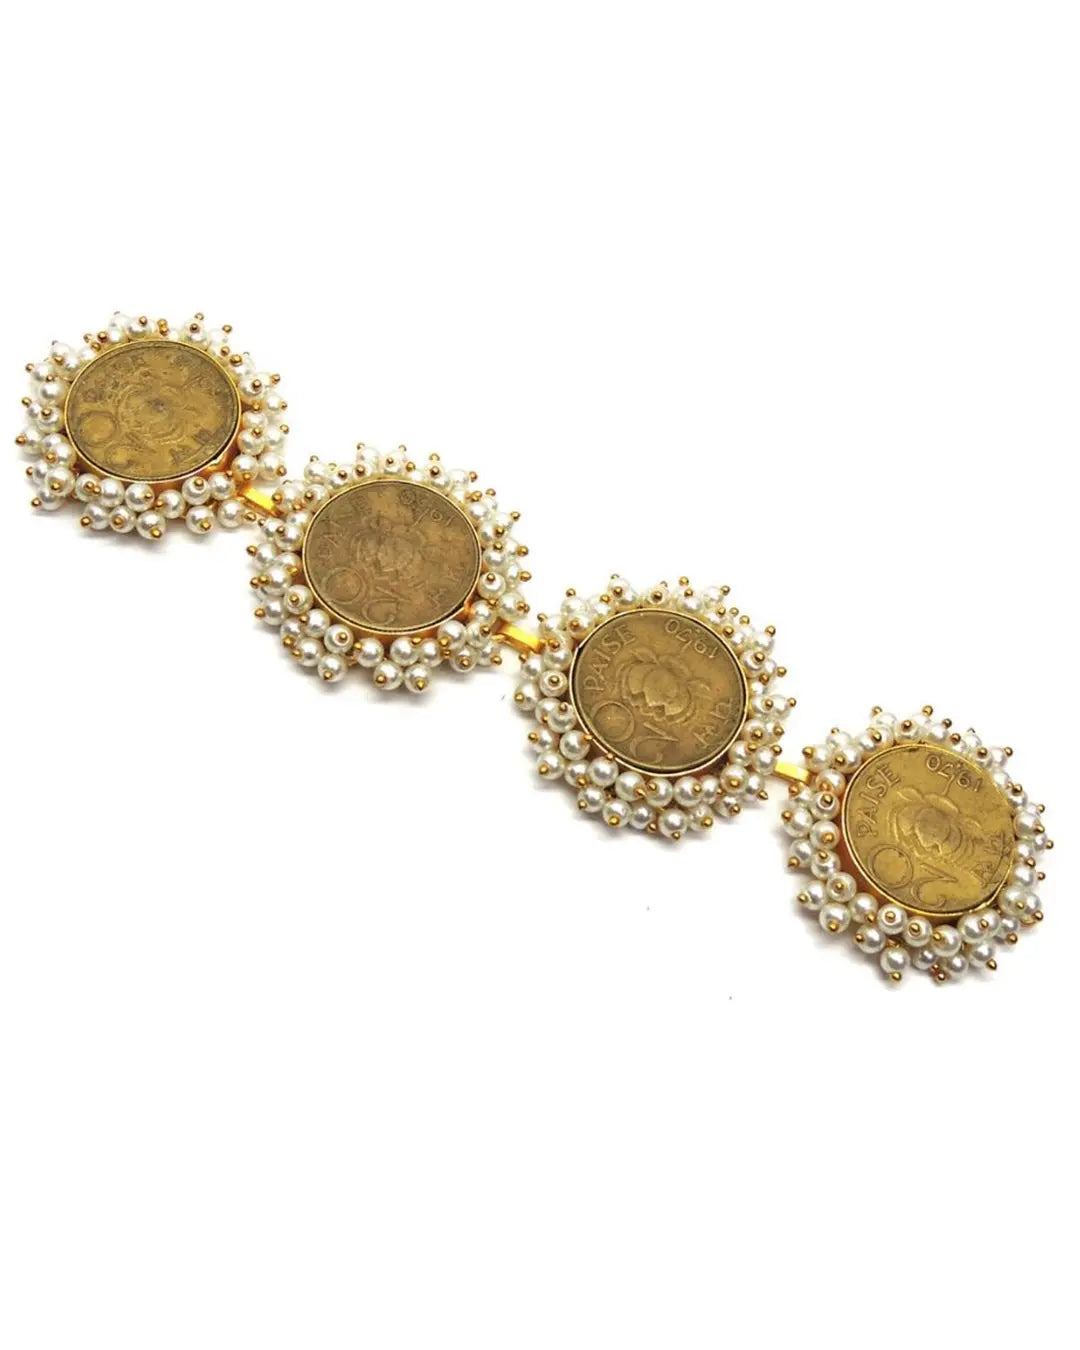 Coin Bloom Bracelet- Handcrafted Jewellery from Dori